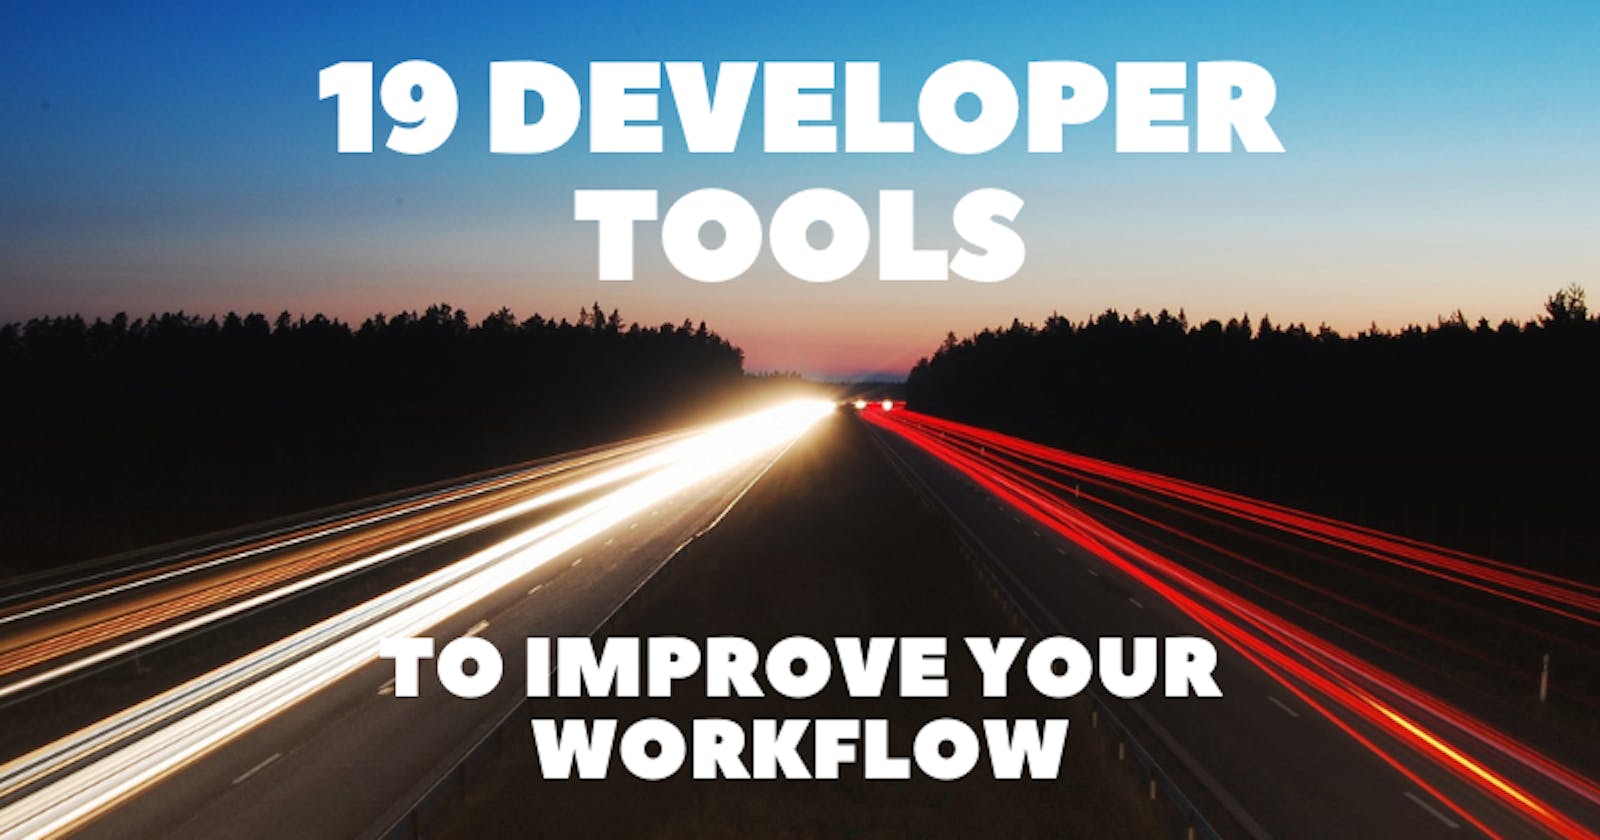 19 Developer Tools to Improve Your Workflow ⚡🚀